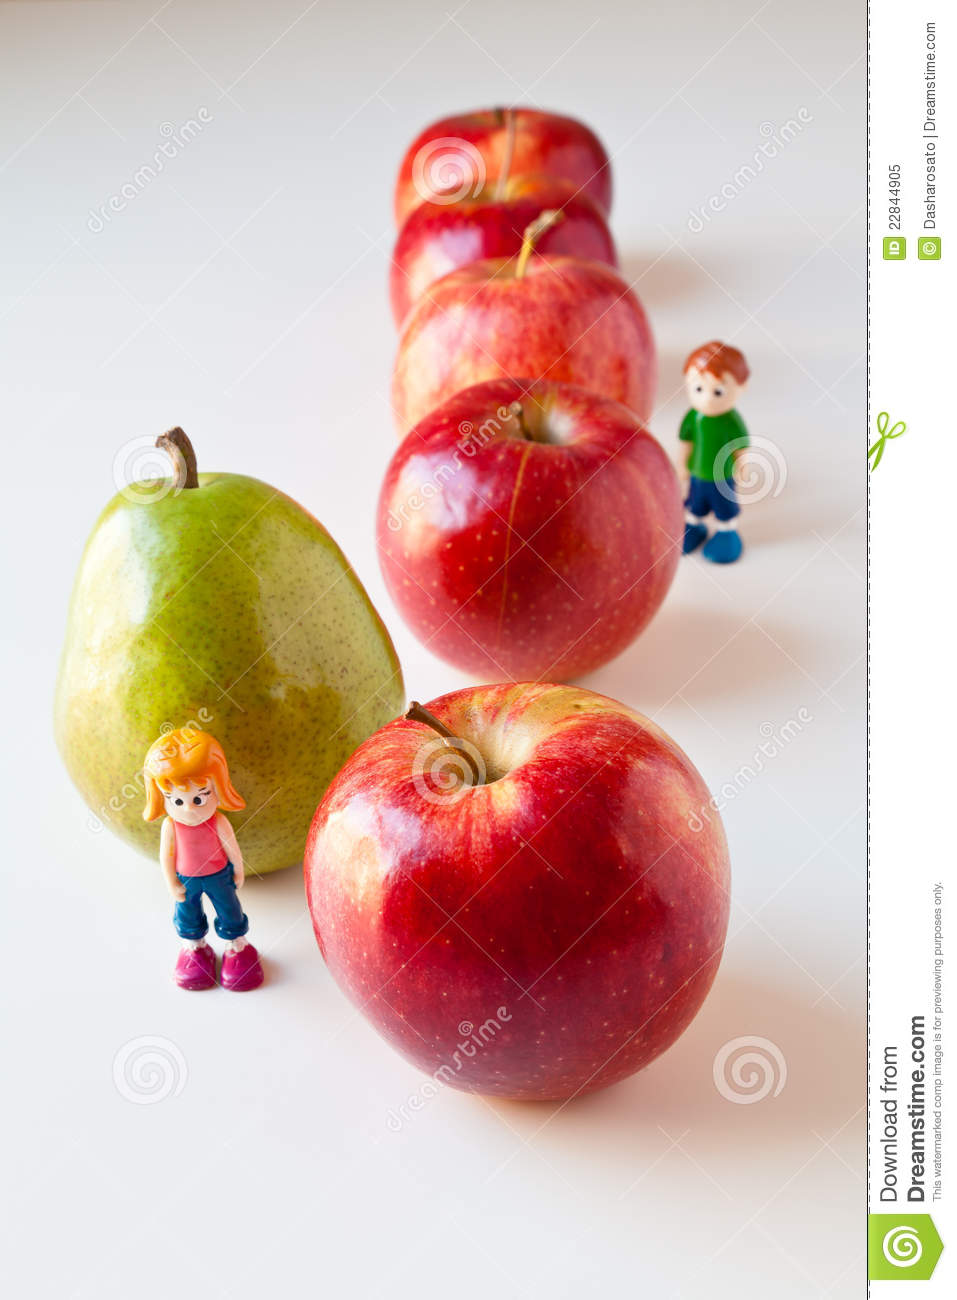 Healthy Choices Royalty Free Stock Photo   Image  22844905